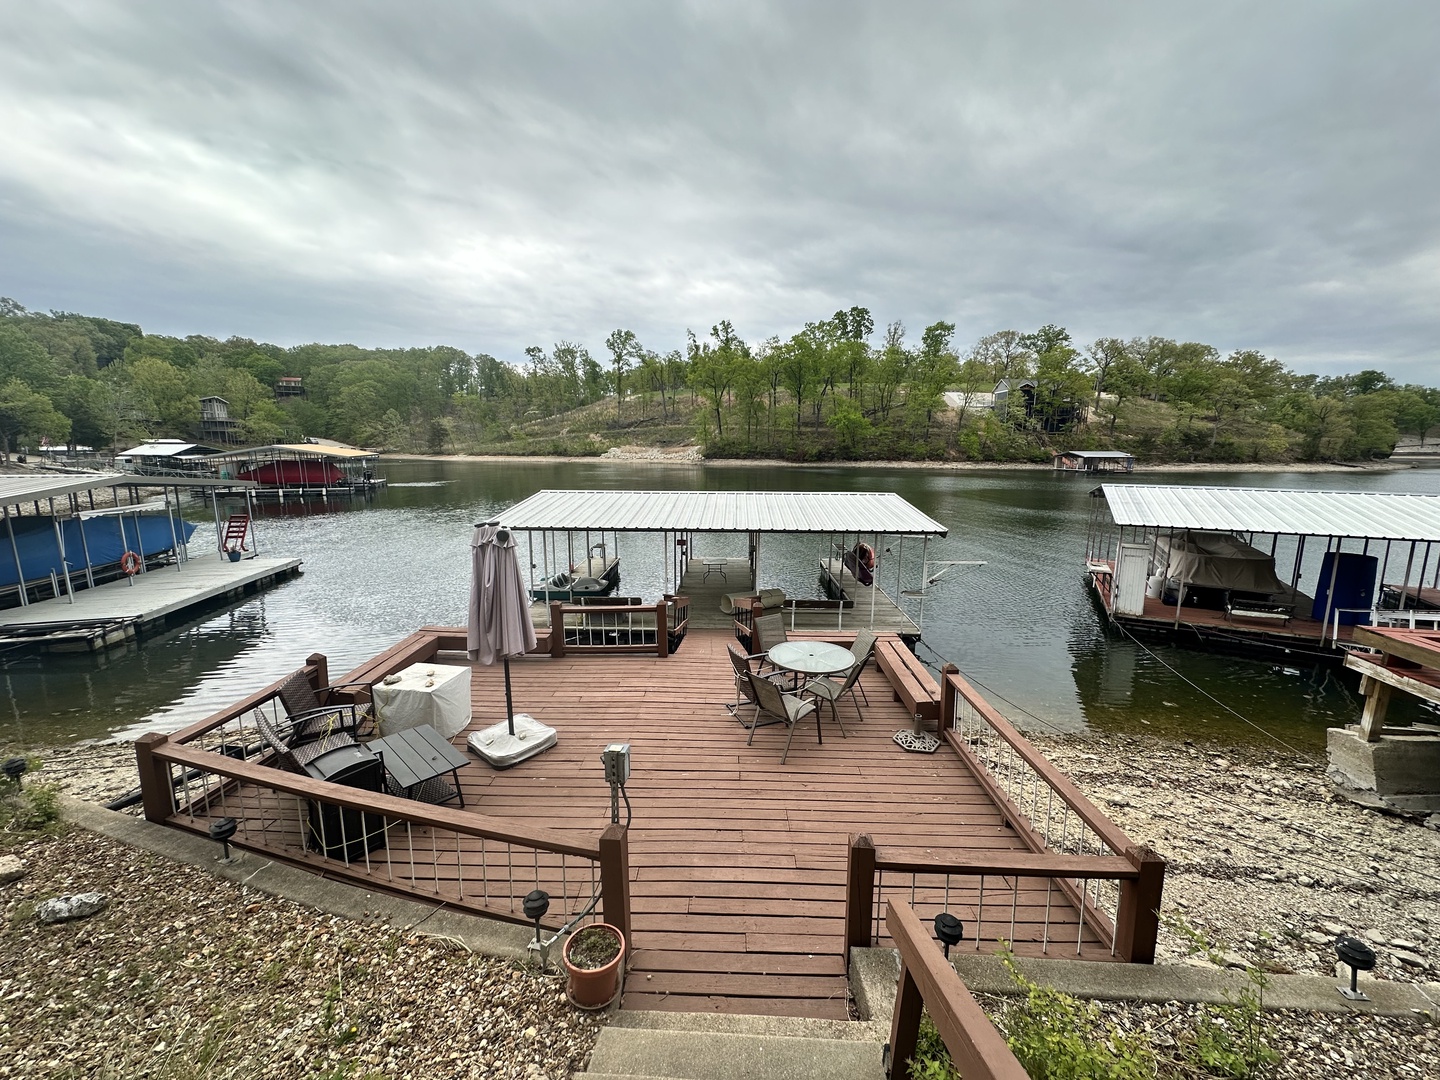 Exclusive access to the private boat dock awaits you